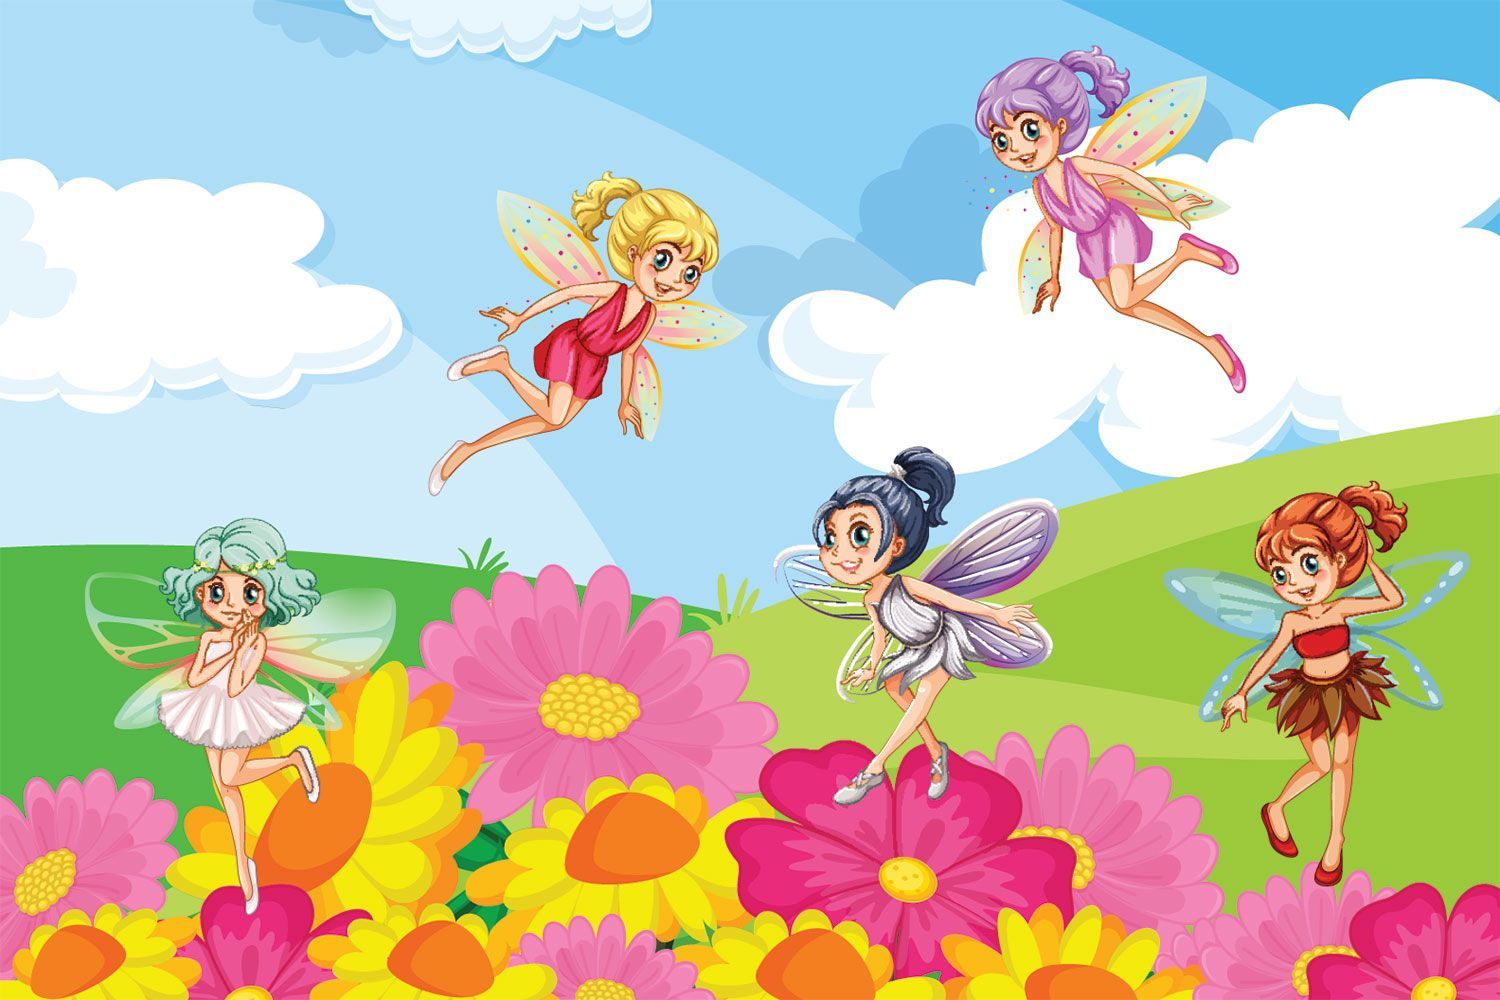 Choose Little Fairies Wallpaper to create fantastic wall decor in your room or browse hundreds of other wallpap. Fairy wallpaper, Fairy illustration, Illustration